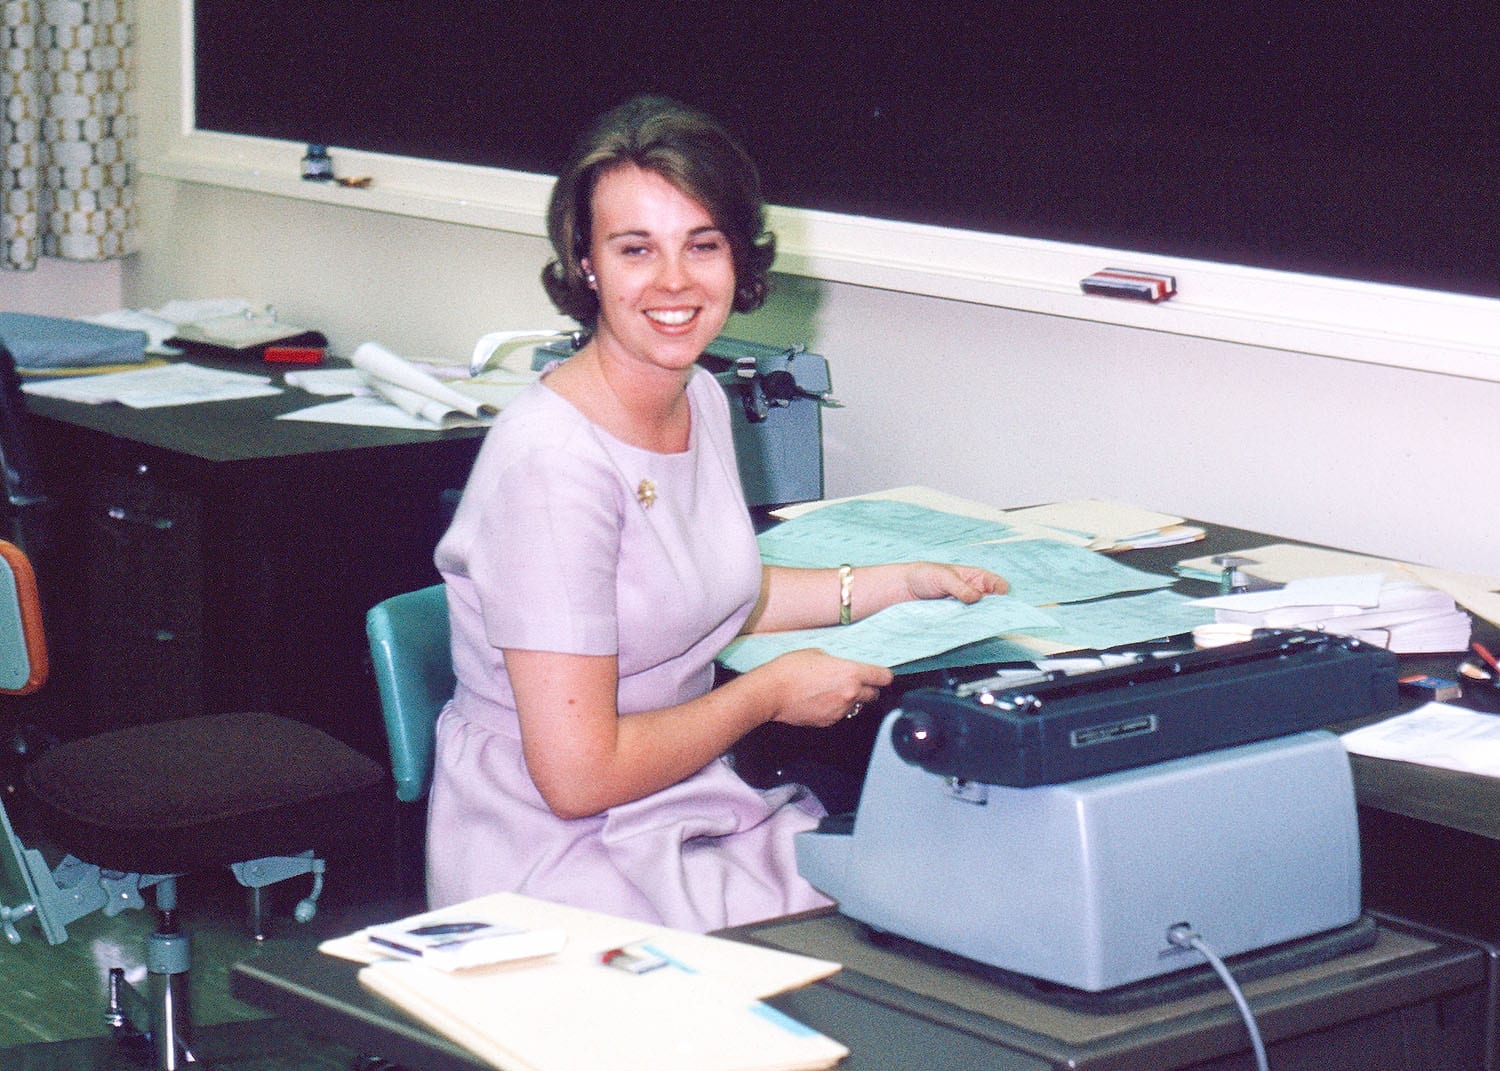 Mary Pat McMahon, Assistant to the Registrar Geoffrey Payzant, at her typewriter in the Writing Lab.